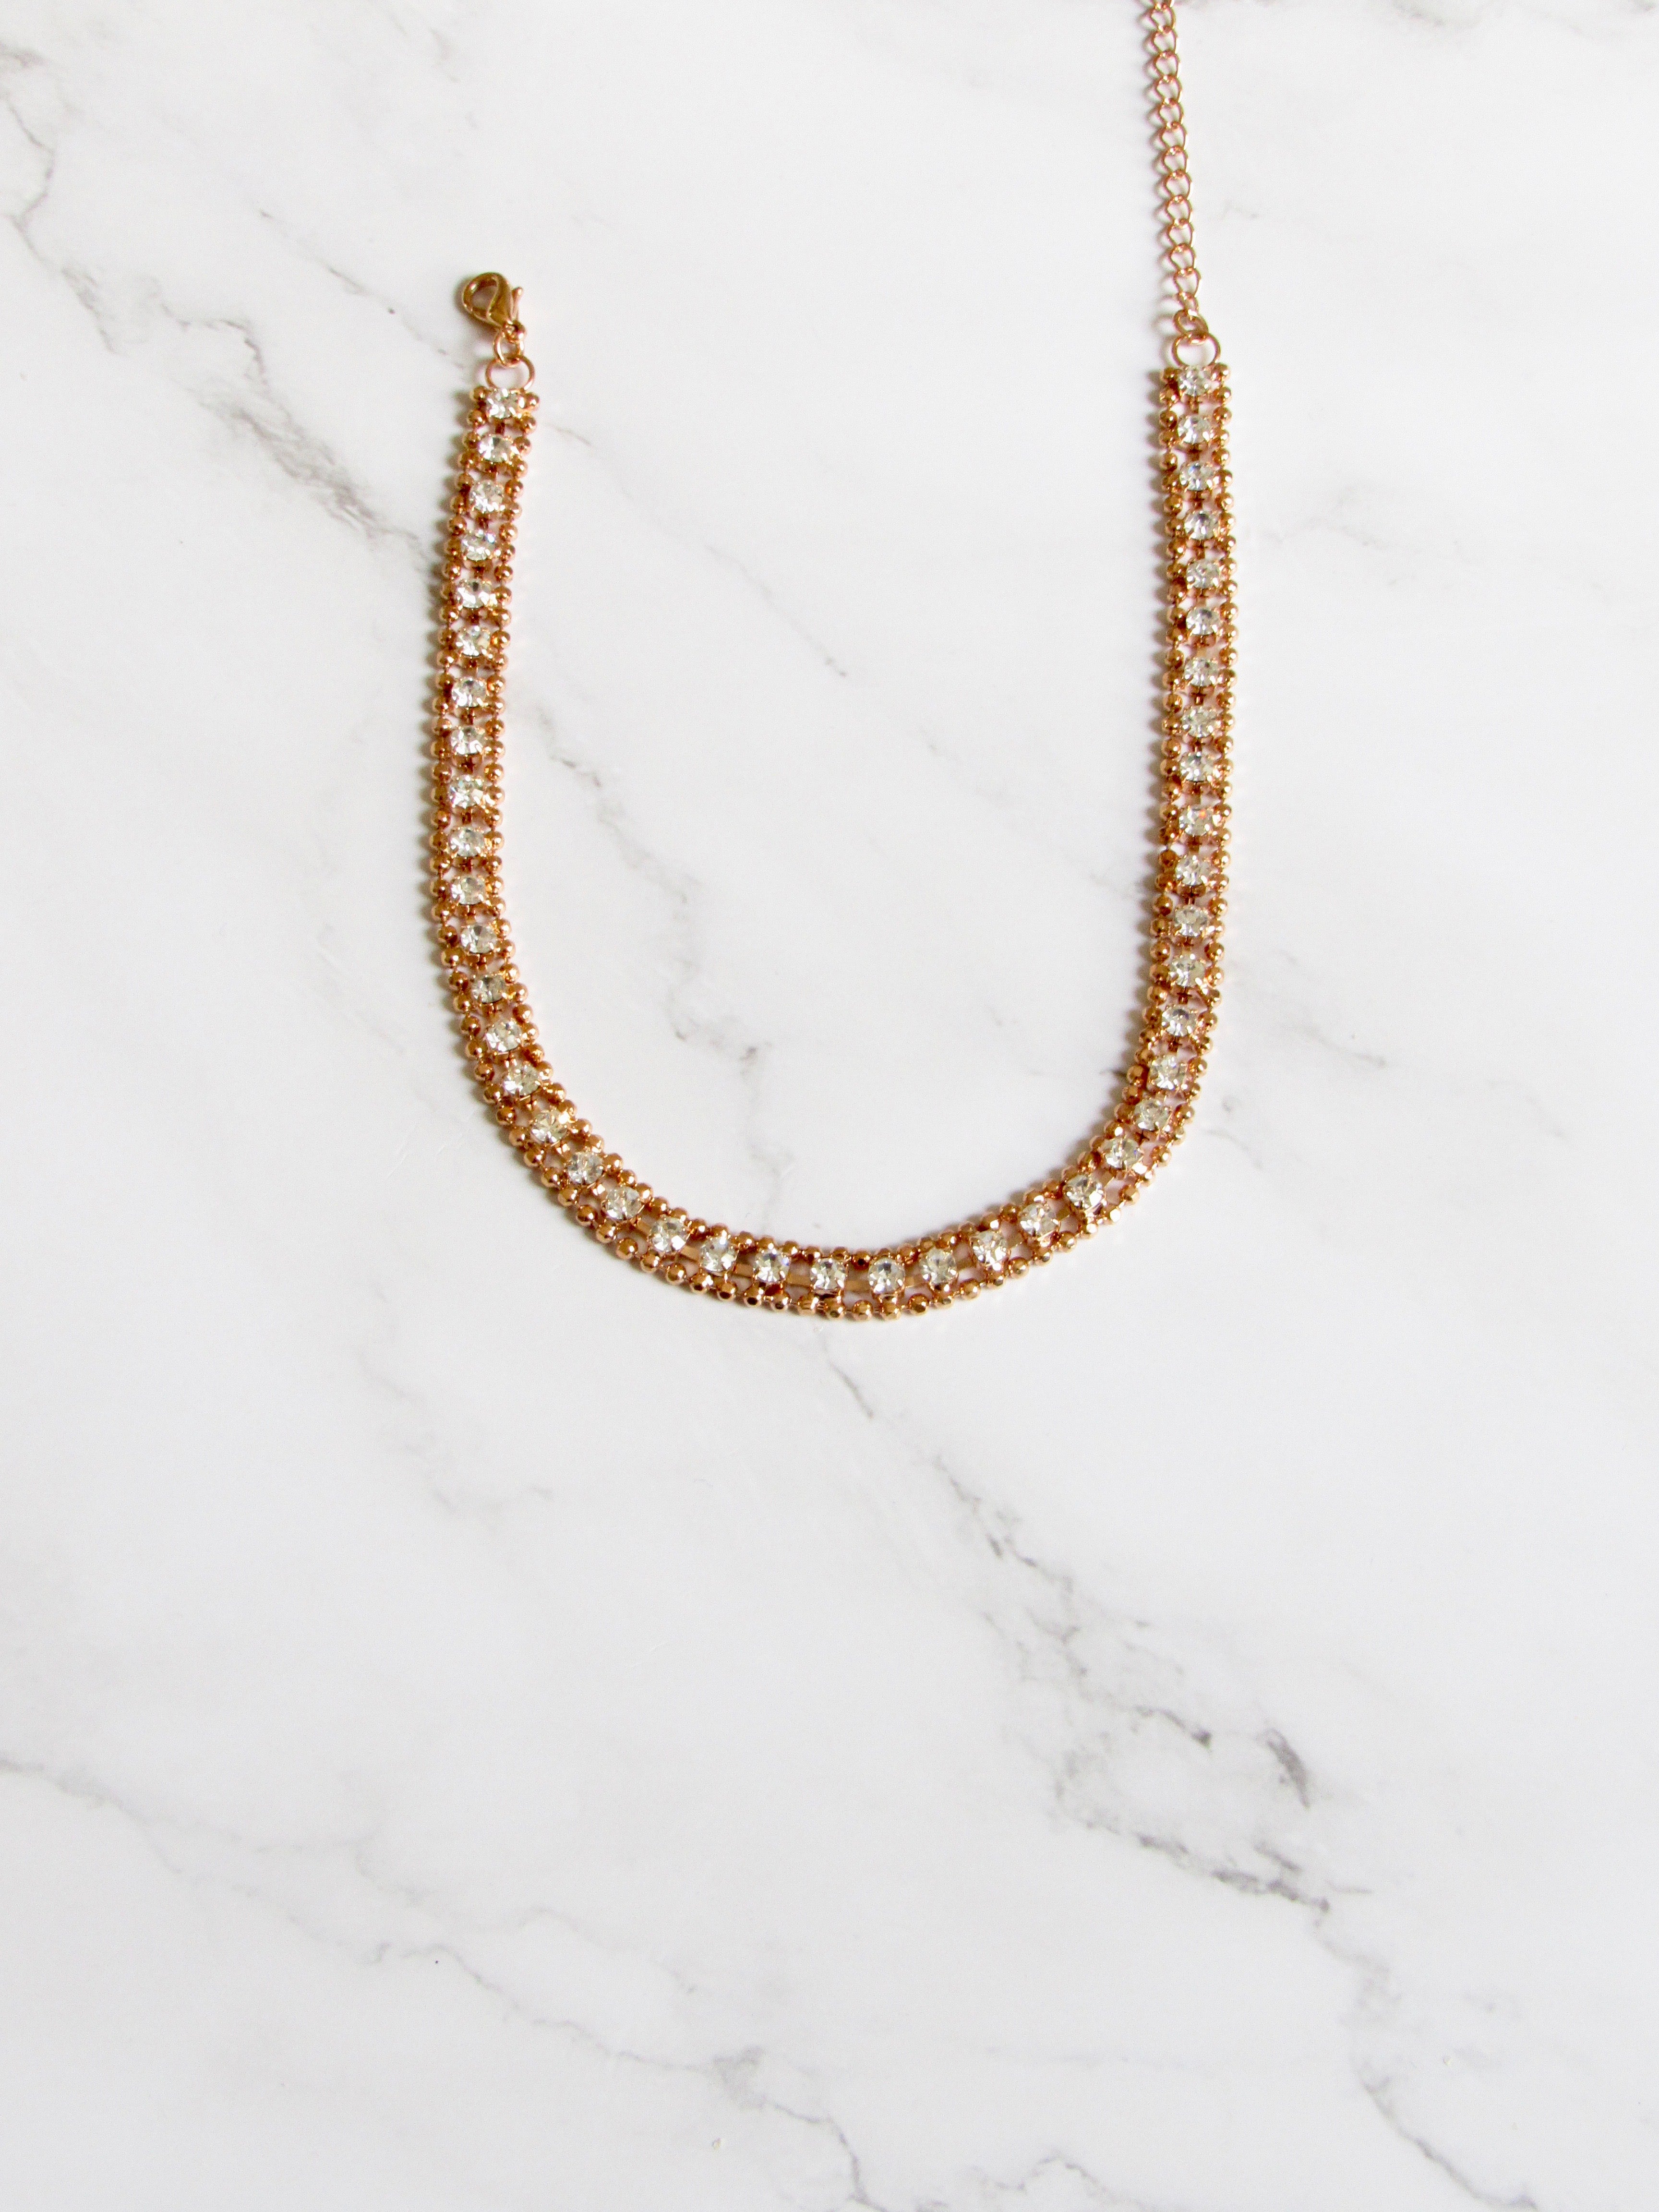 Sparkled Crystal Rose Gold Lace Collar Necklace